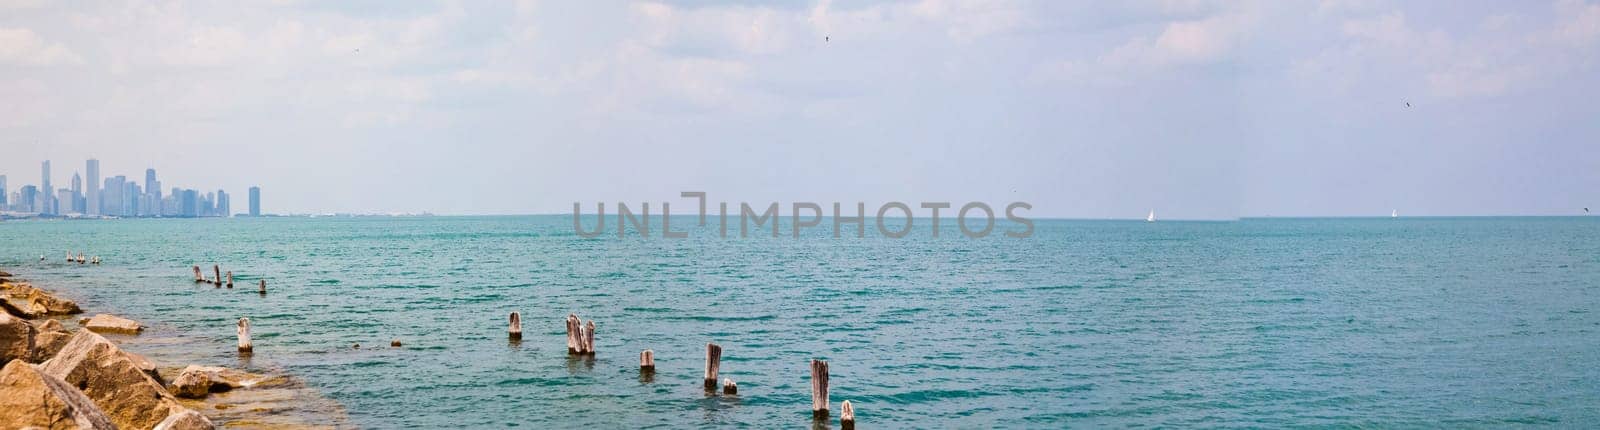 Tranquil Lakefront View with Chicago Skyline Backdrop by njproductions